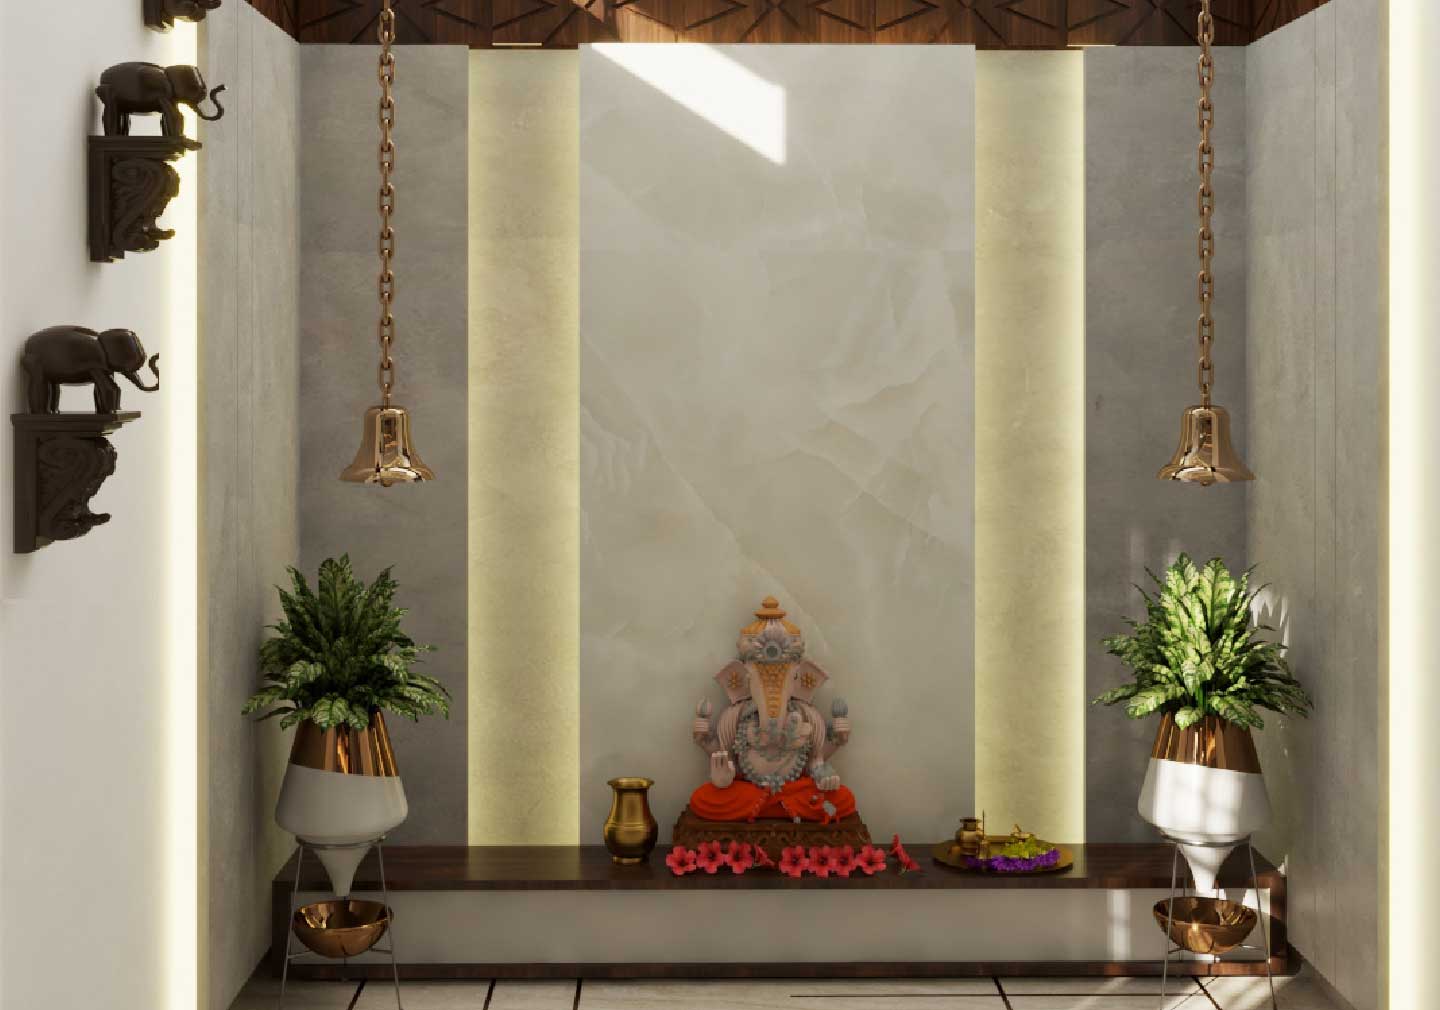 Incorporating Nature: Plants and Water Features for pooja room interior designs